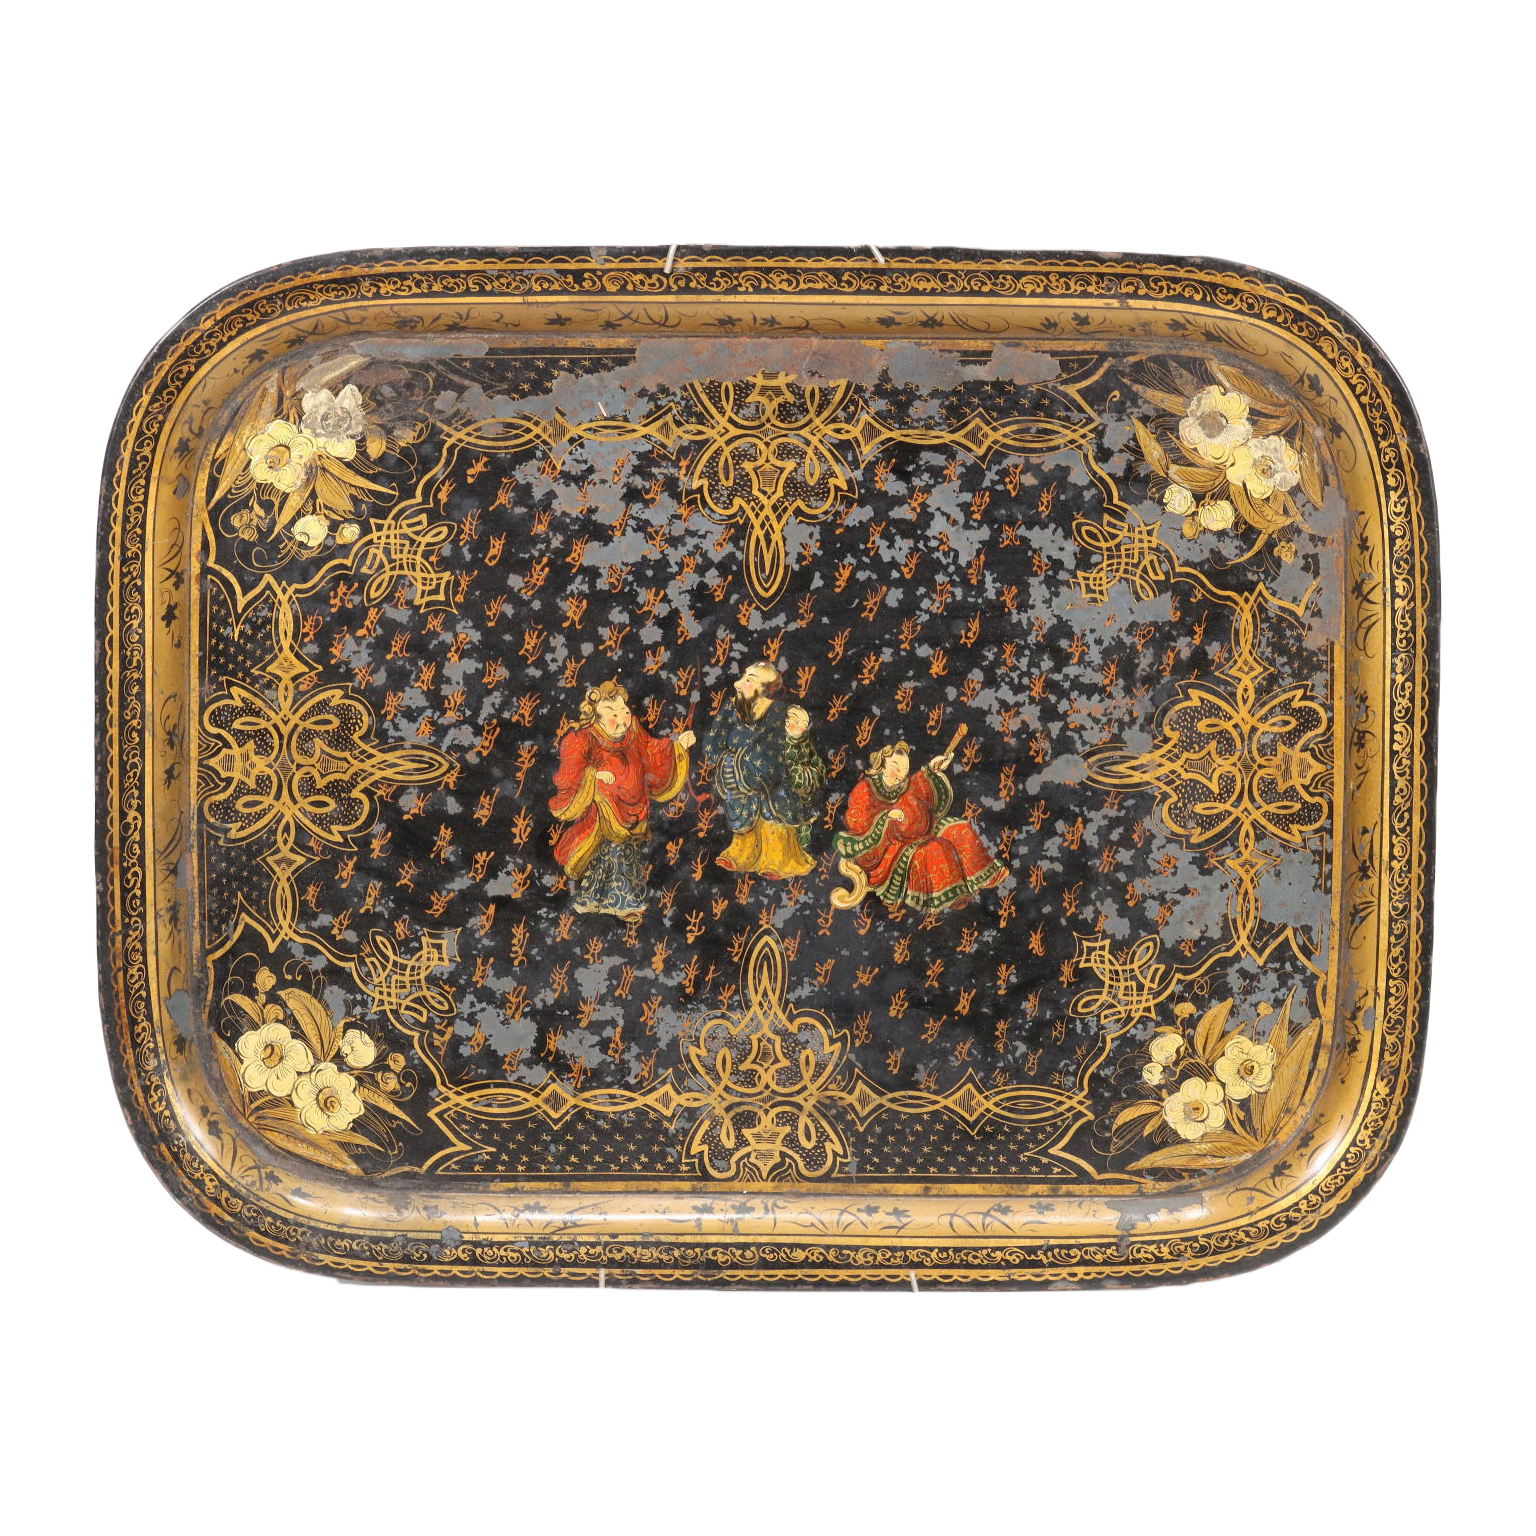 Chinese Engraved Brass Tray, 1920s for sale at Pamono